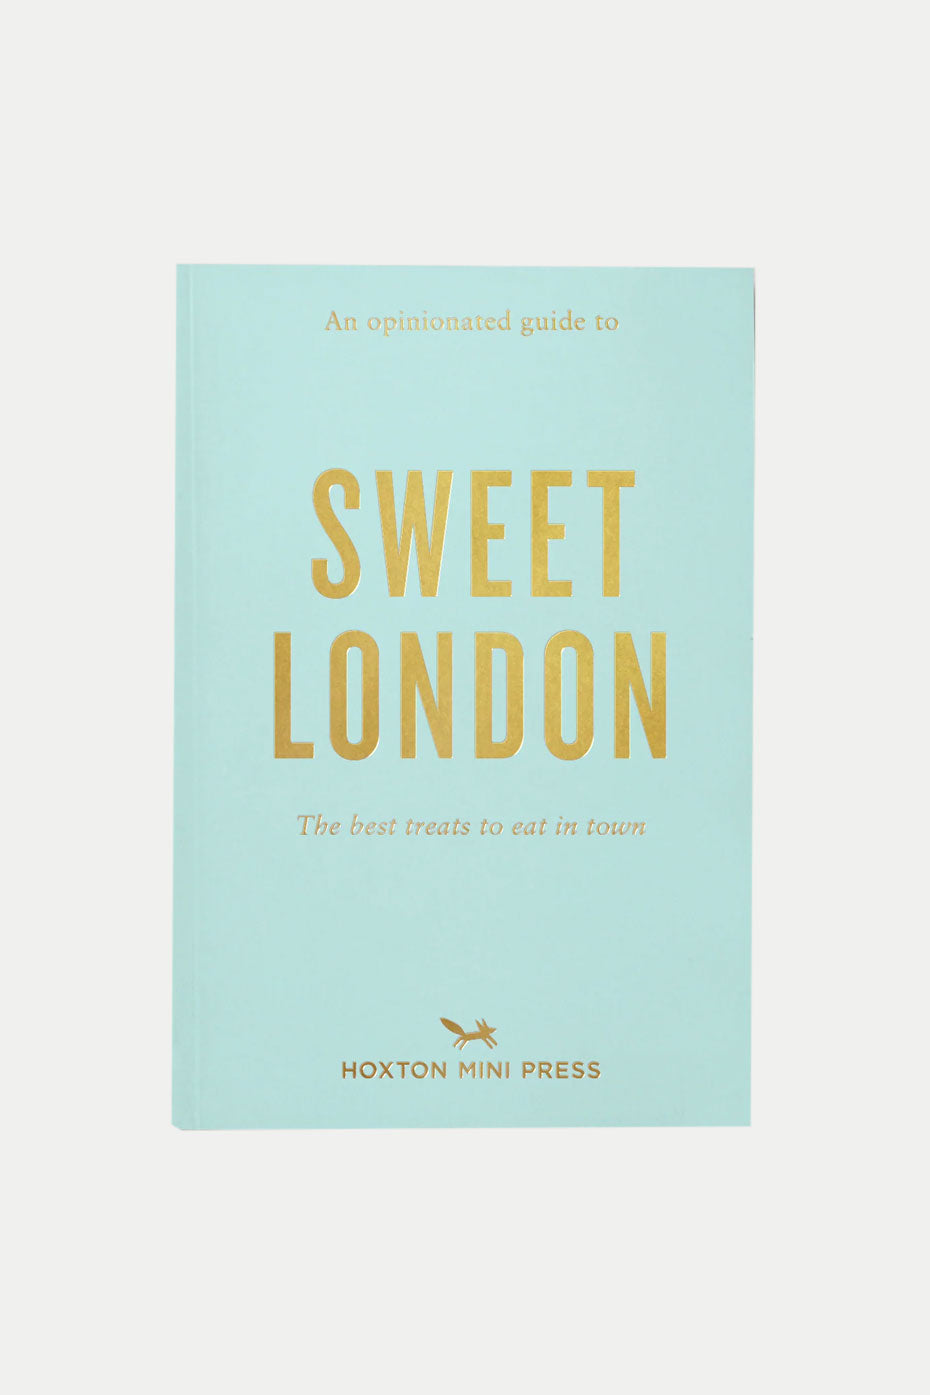 Turnaround Books An Opinionated Guide To Sweet London